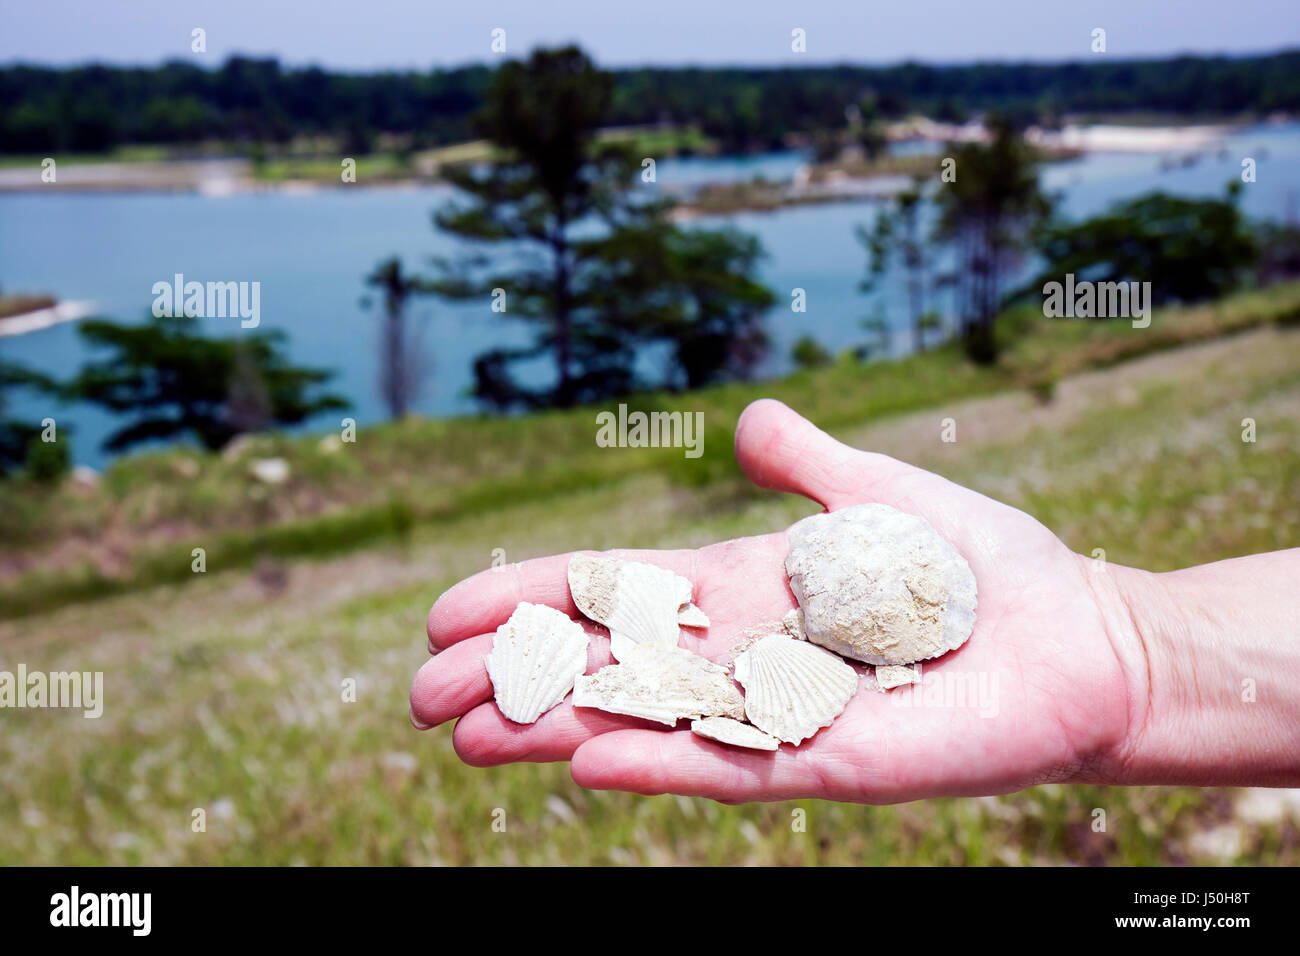 Alabama,St. Stephens,St. Stephens historic Site,former quarry,fossils,shells,archeology,hand,hands,show,natural history,AL080514034 Stock Photo